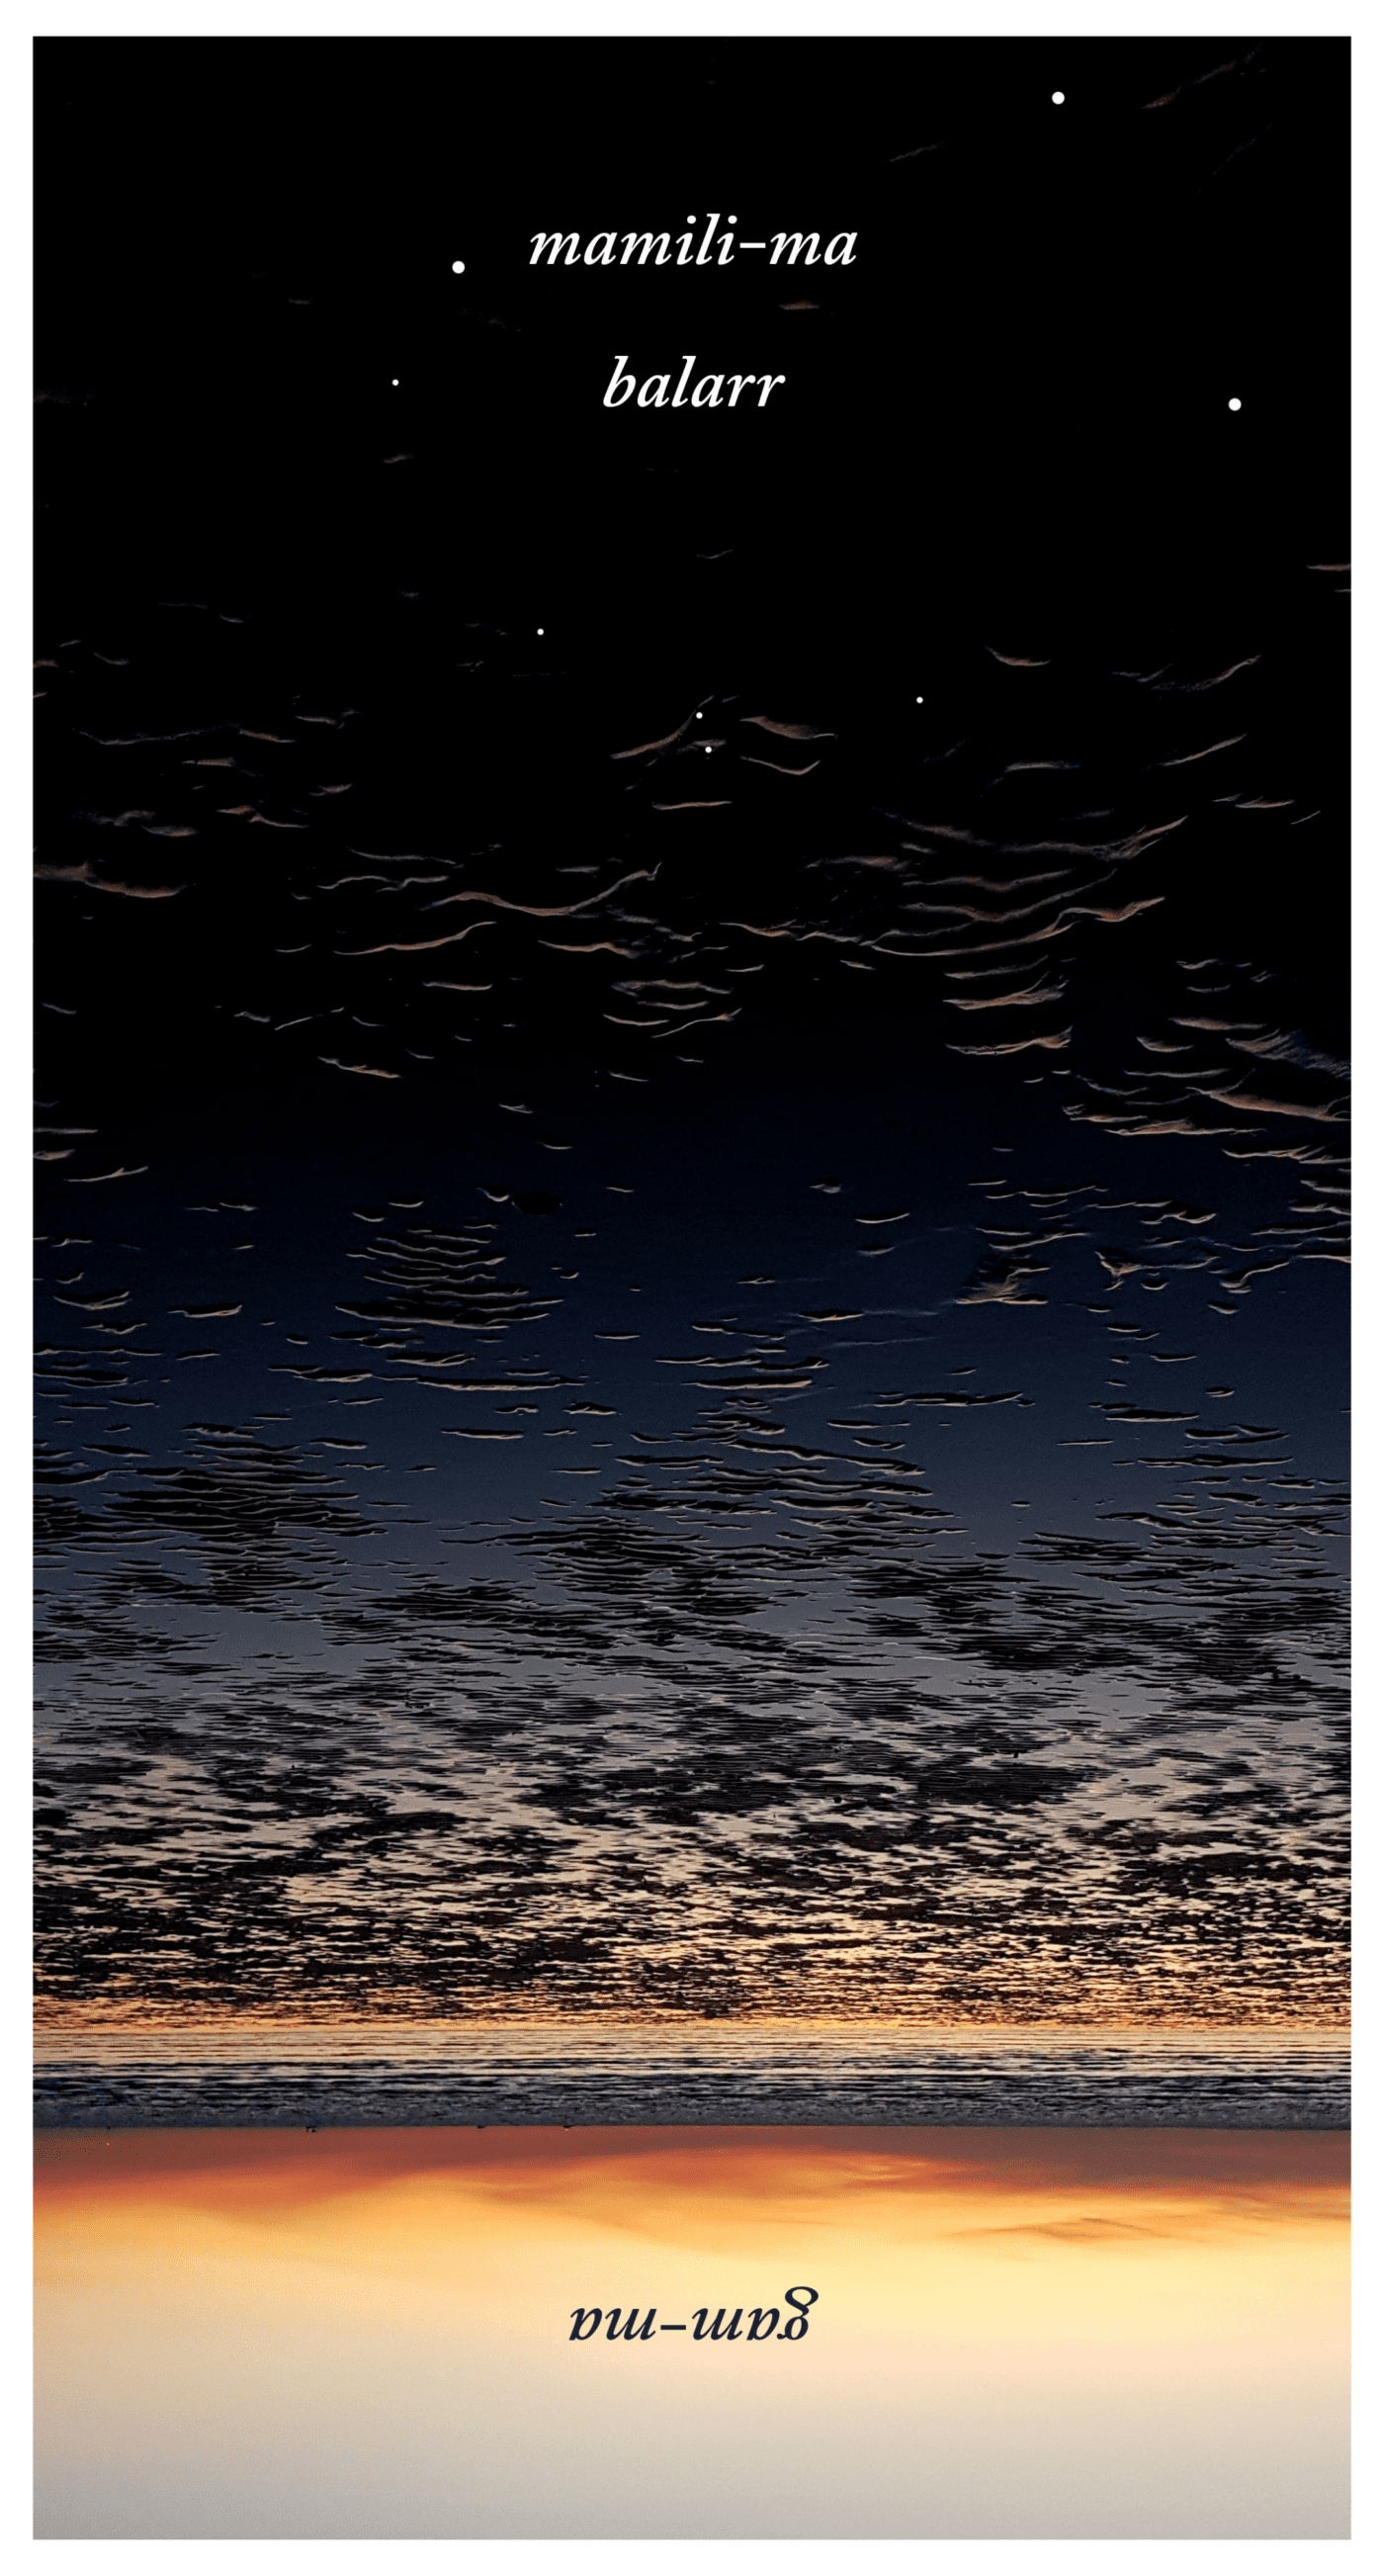 The words 'mamili-ma balarr' appear at the top of an image. It is a photograph of a horizon at dusk over mudflats, turned upside down. This flip makes the dark mudflats appear like clouds, giving way to stars superimposed in the dark water. The word 'gam-ma' appears upside down at the bottom of the image.